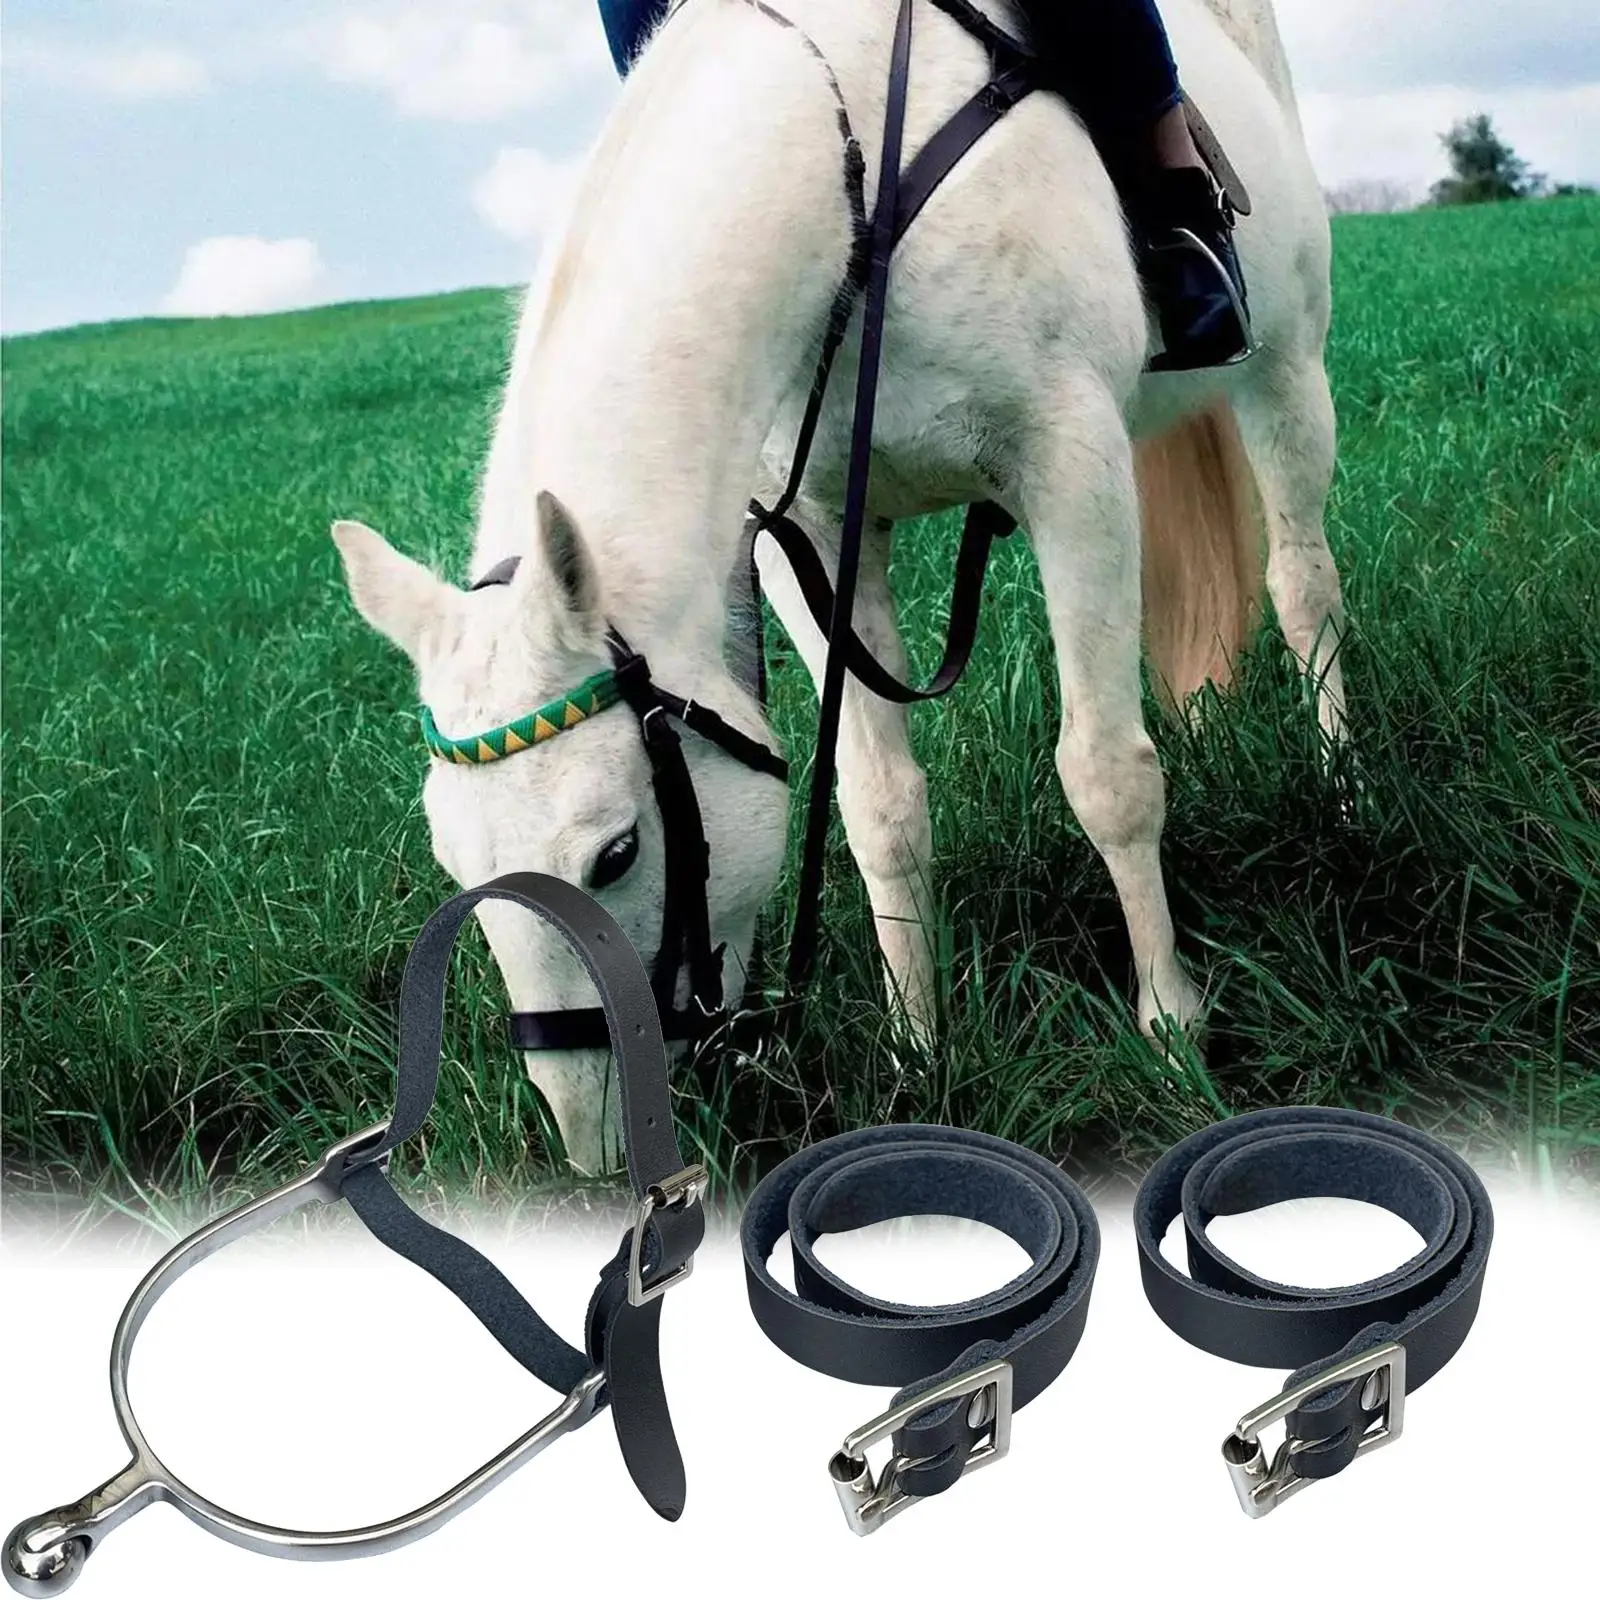 2Pcs Spur Straps English Spur Straps Durable Men Adjustable with Metal Buckle Boot Straps for Equestrian Horse Riding Outdoor